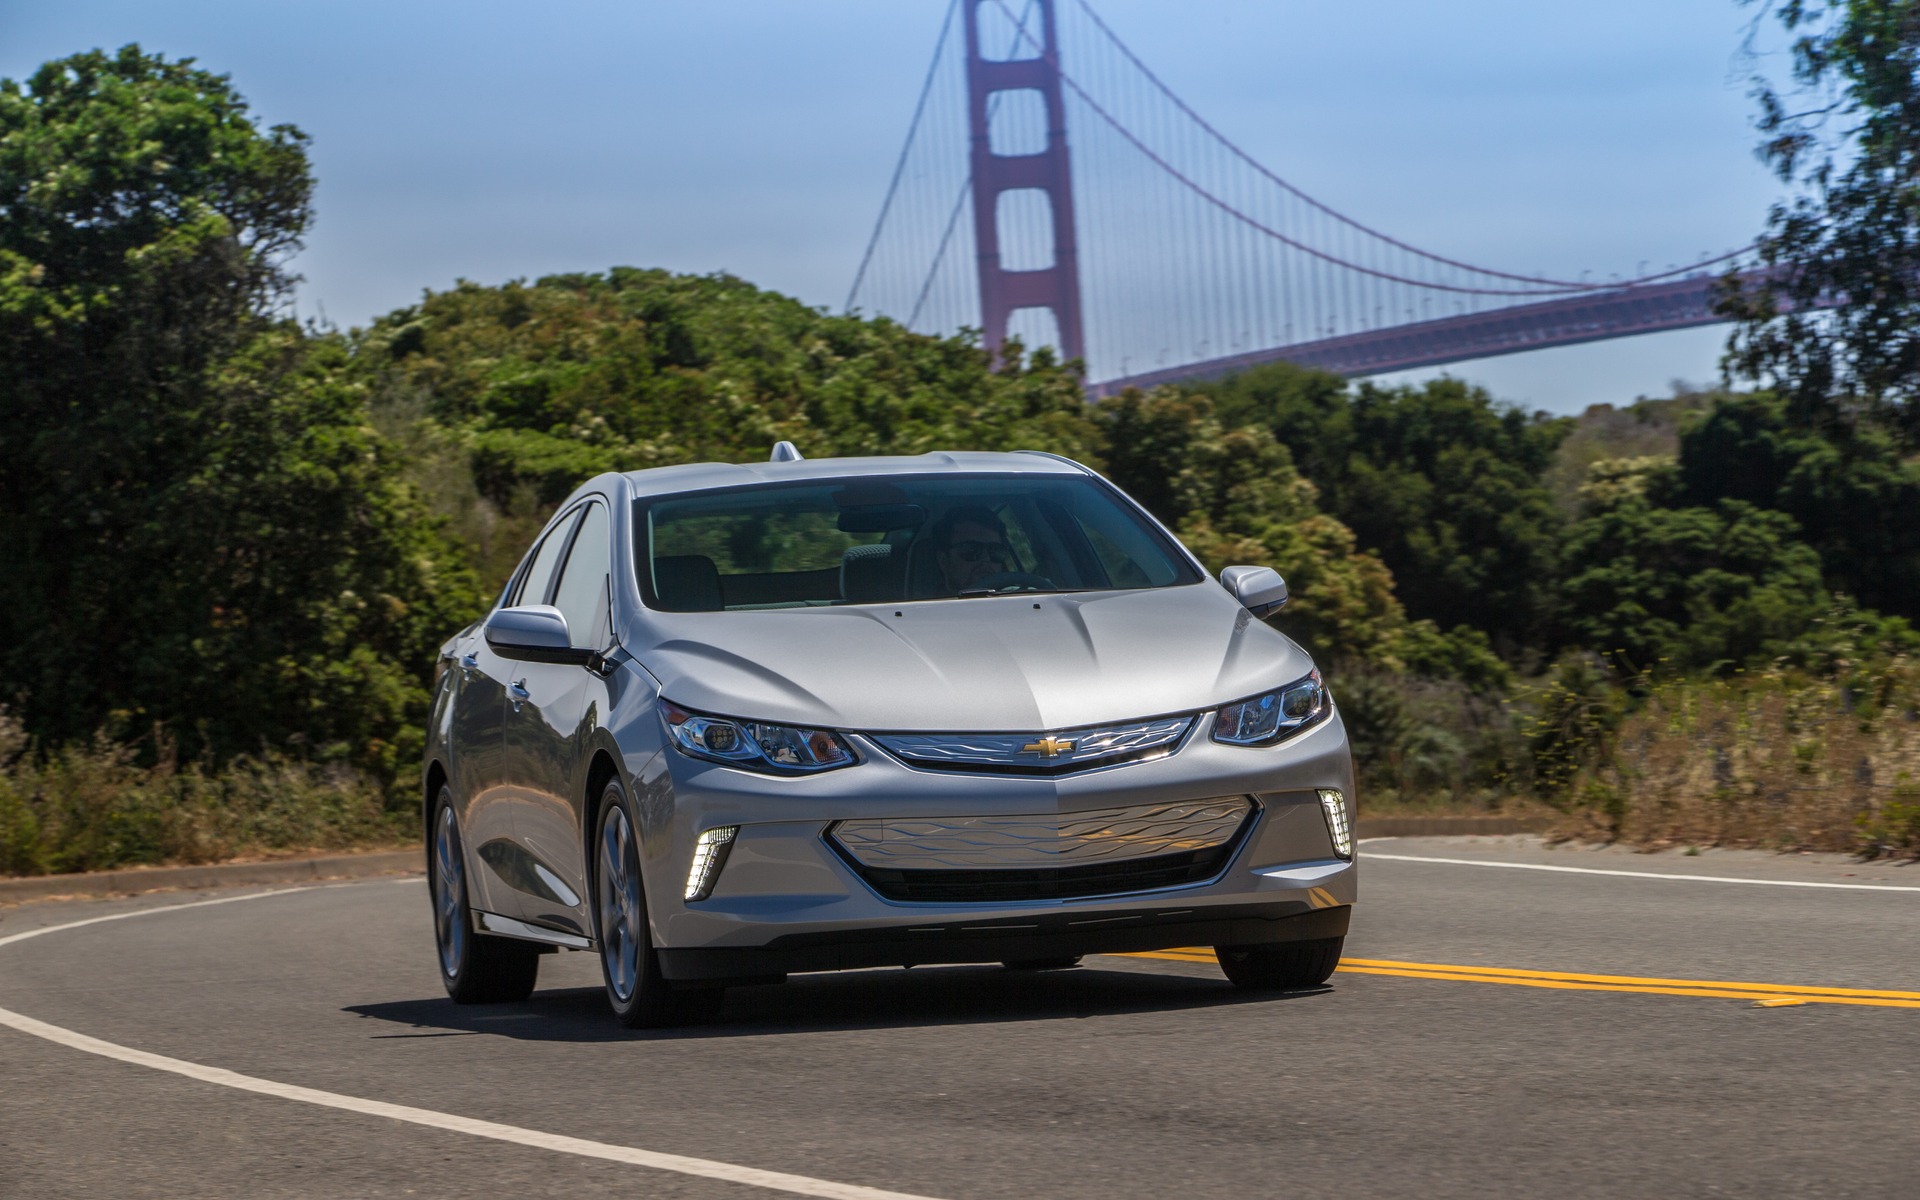 Chevrolet Volt, Chevrolet Cruze and Four Other GM Cars: Dead - The Car ...